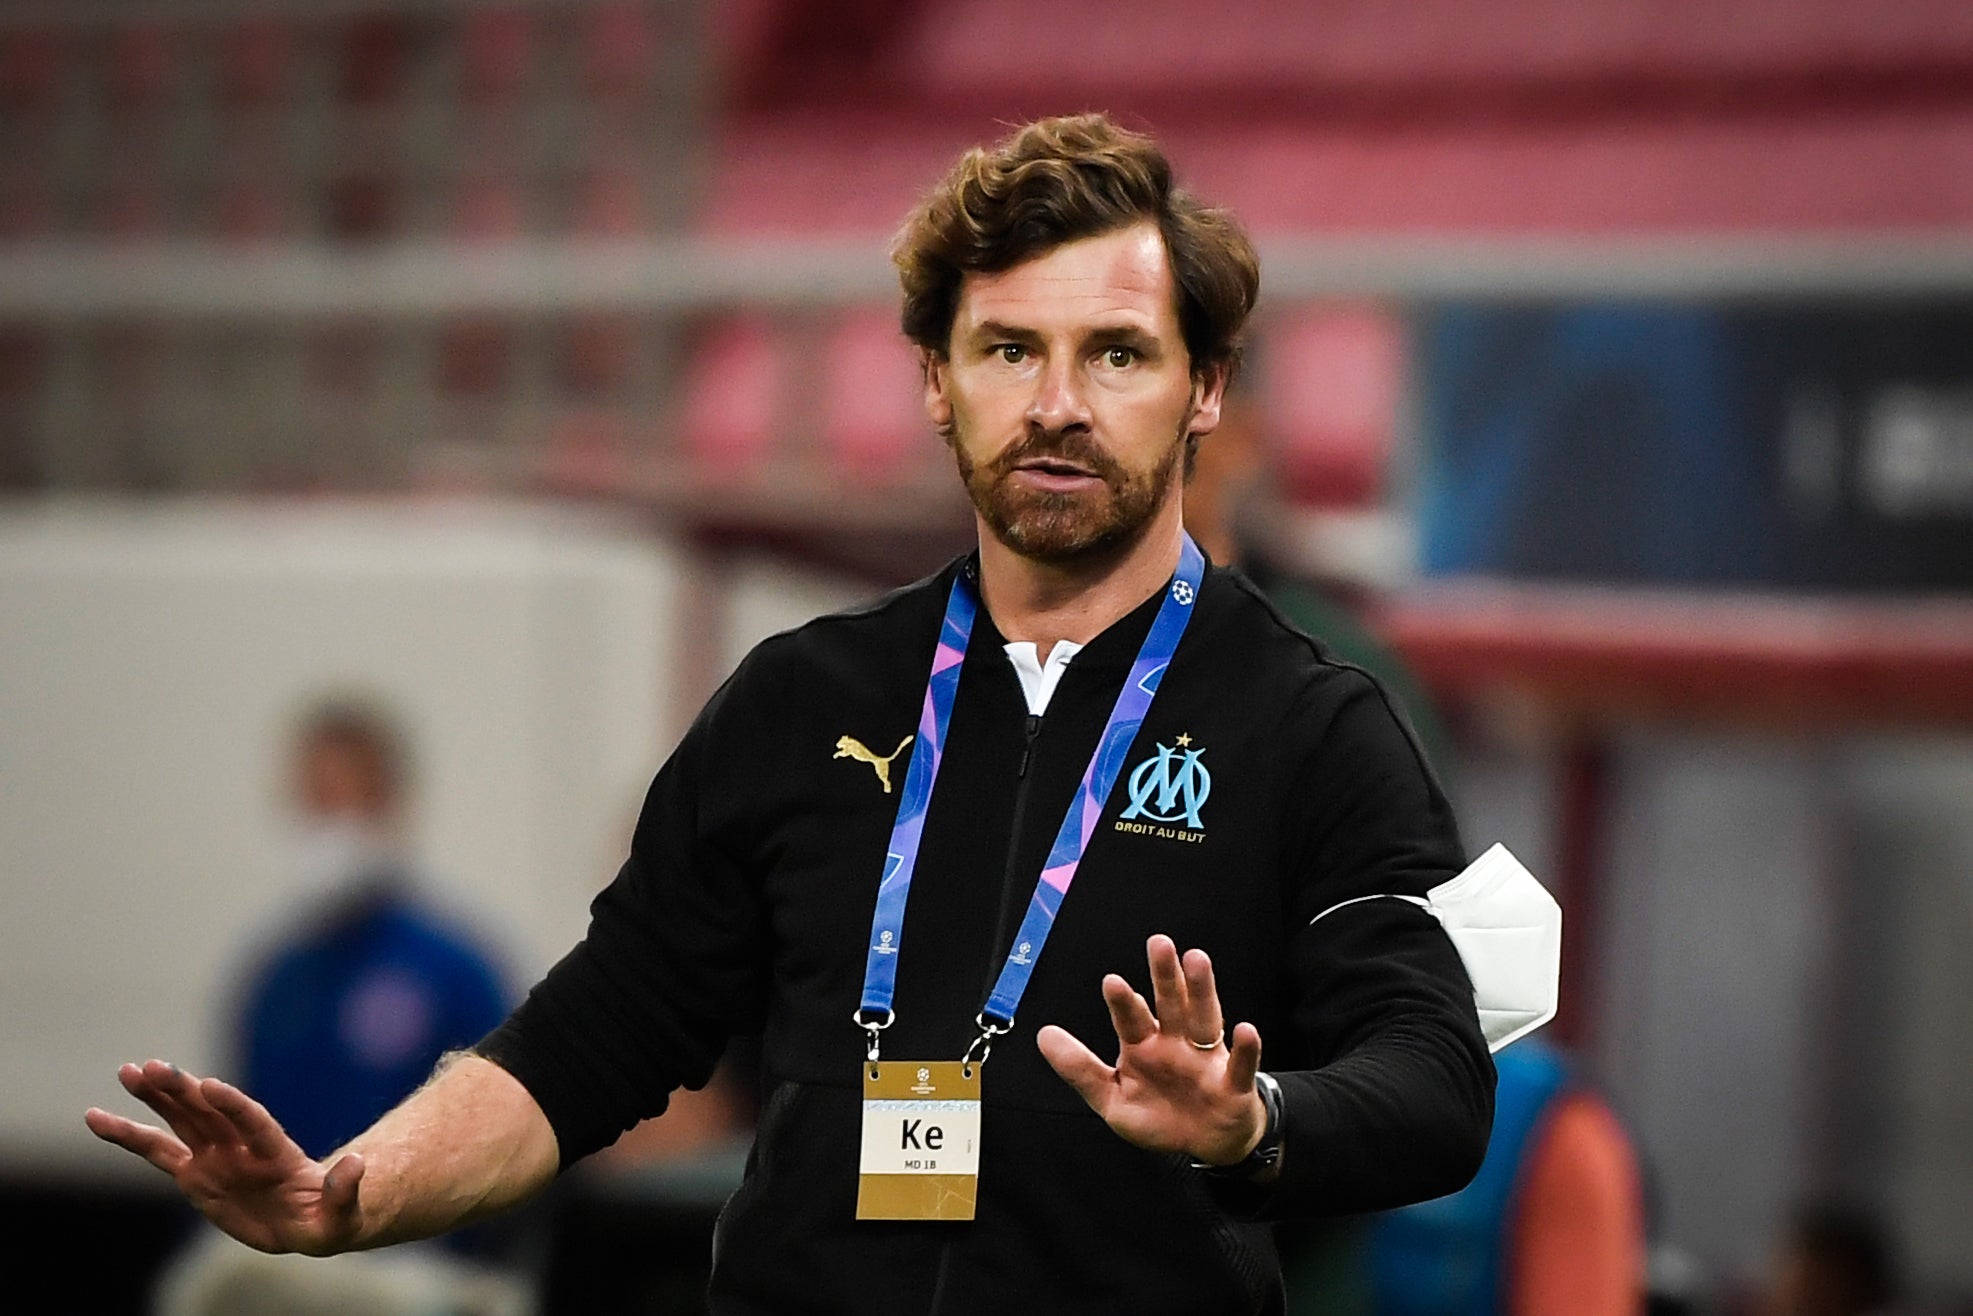 Marseille coach Andre Villas-Boas, former manager at Chelsea and Tottenham